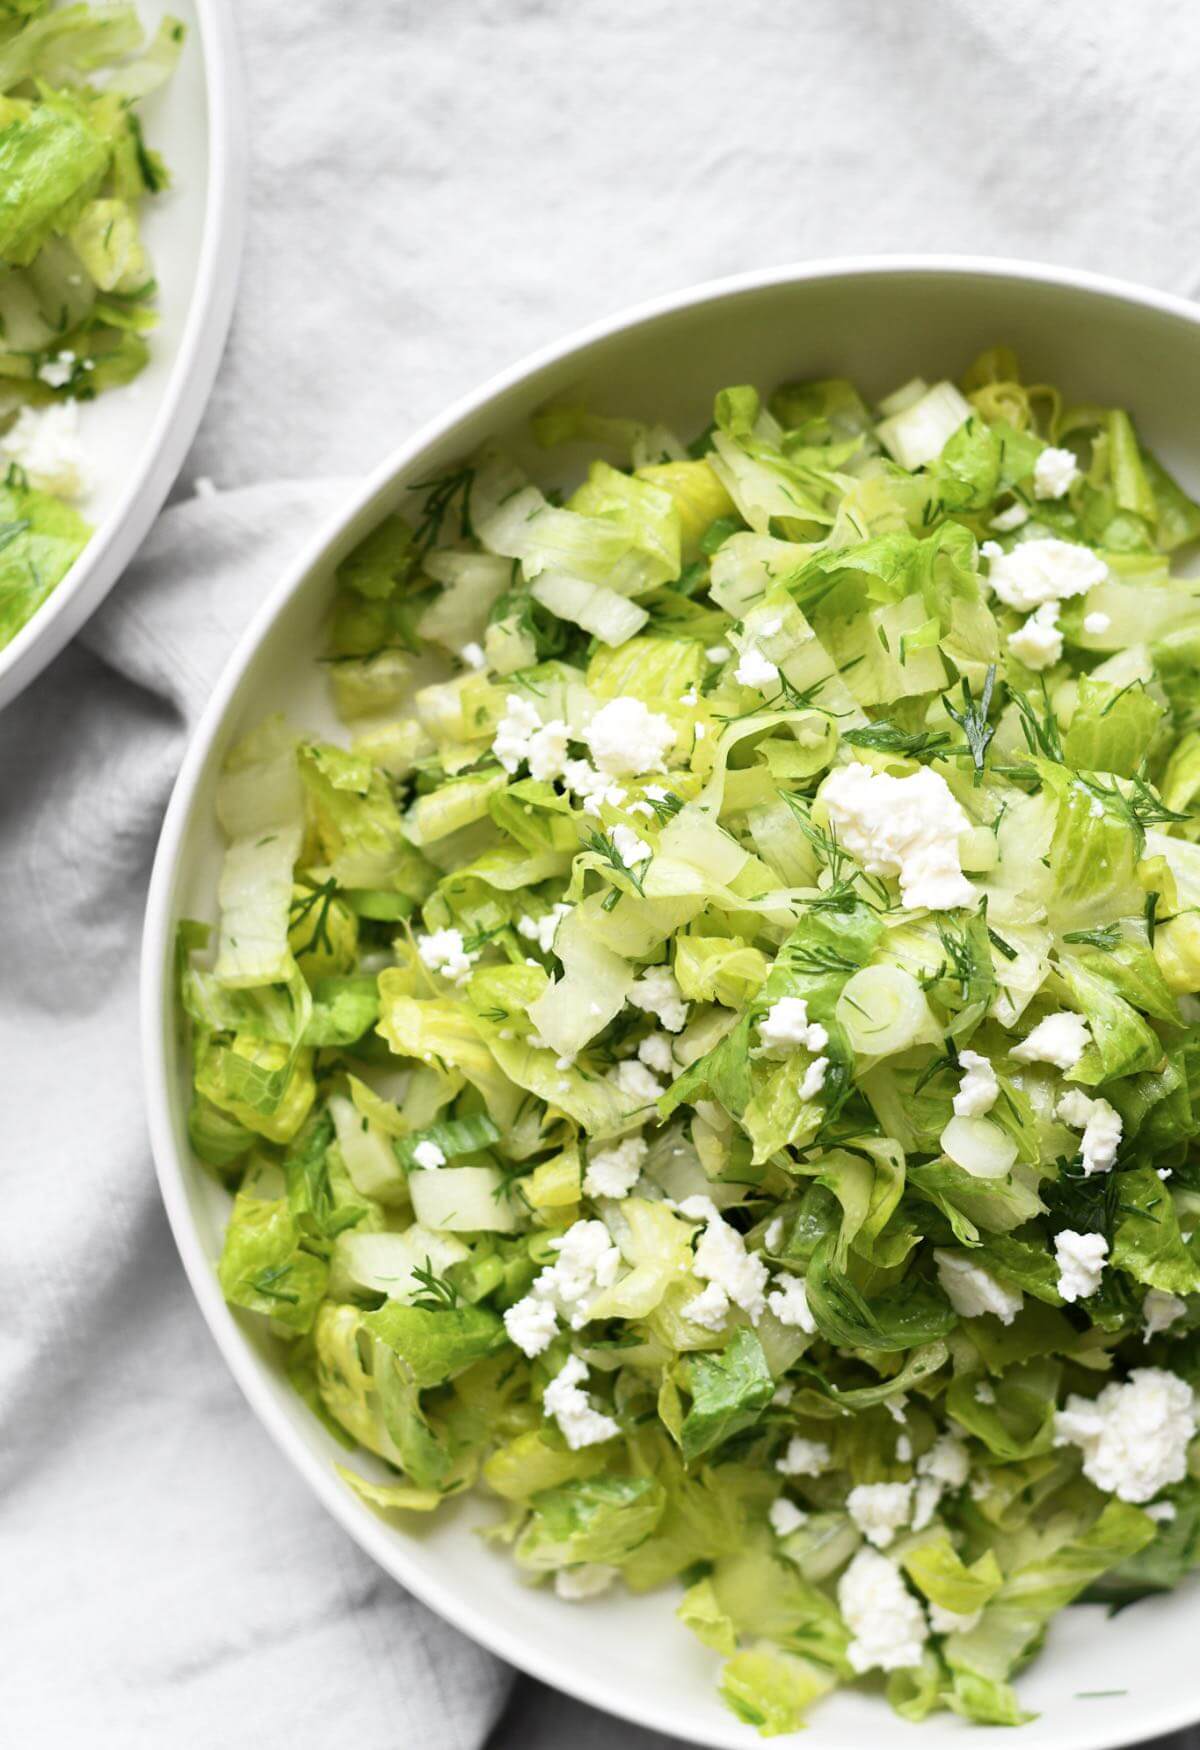 marouli salad with thinly sliced romaine heats, fresh dill, scallions and crumbled feta cheese in a white bowl.